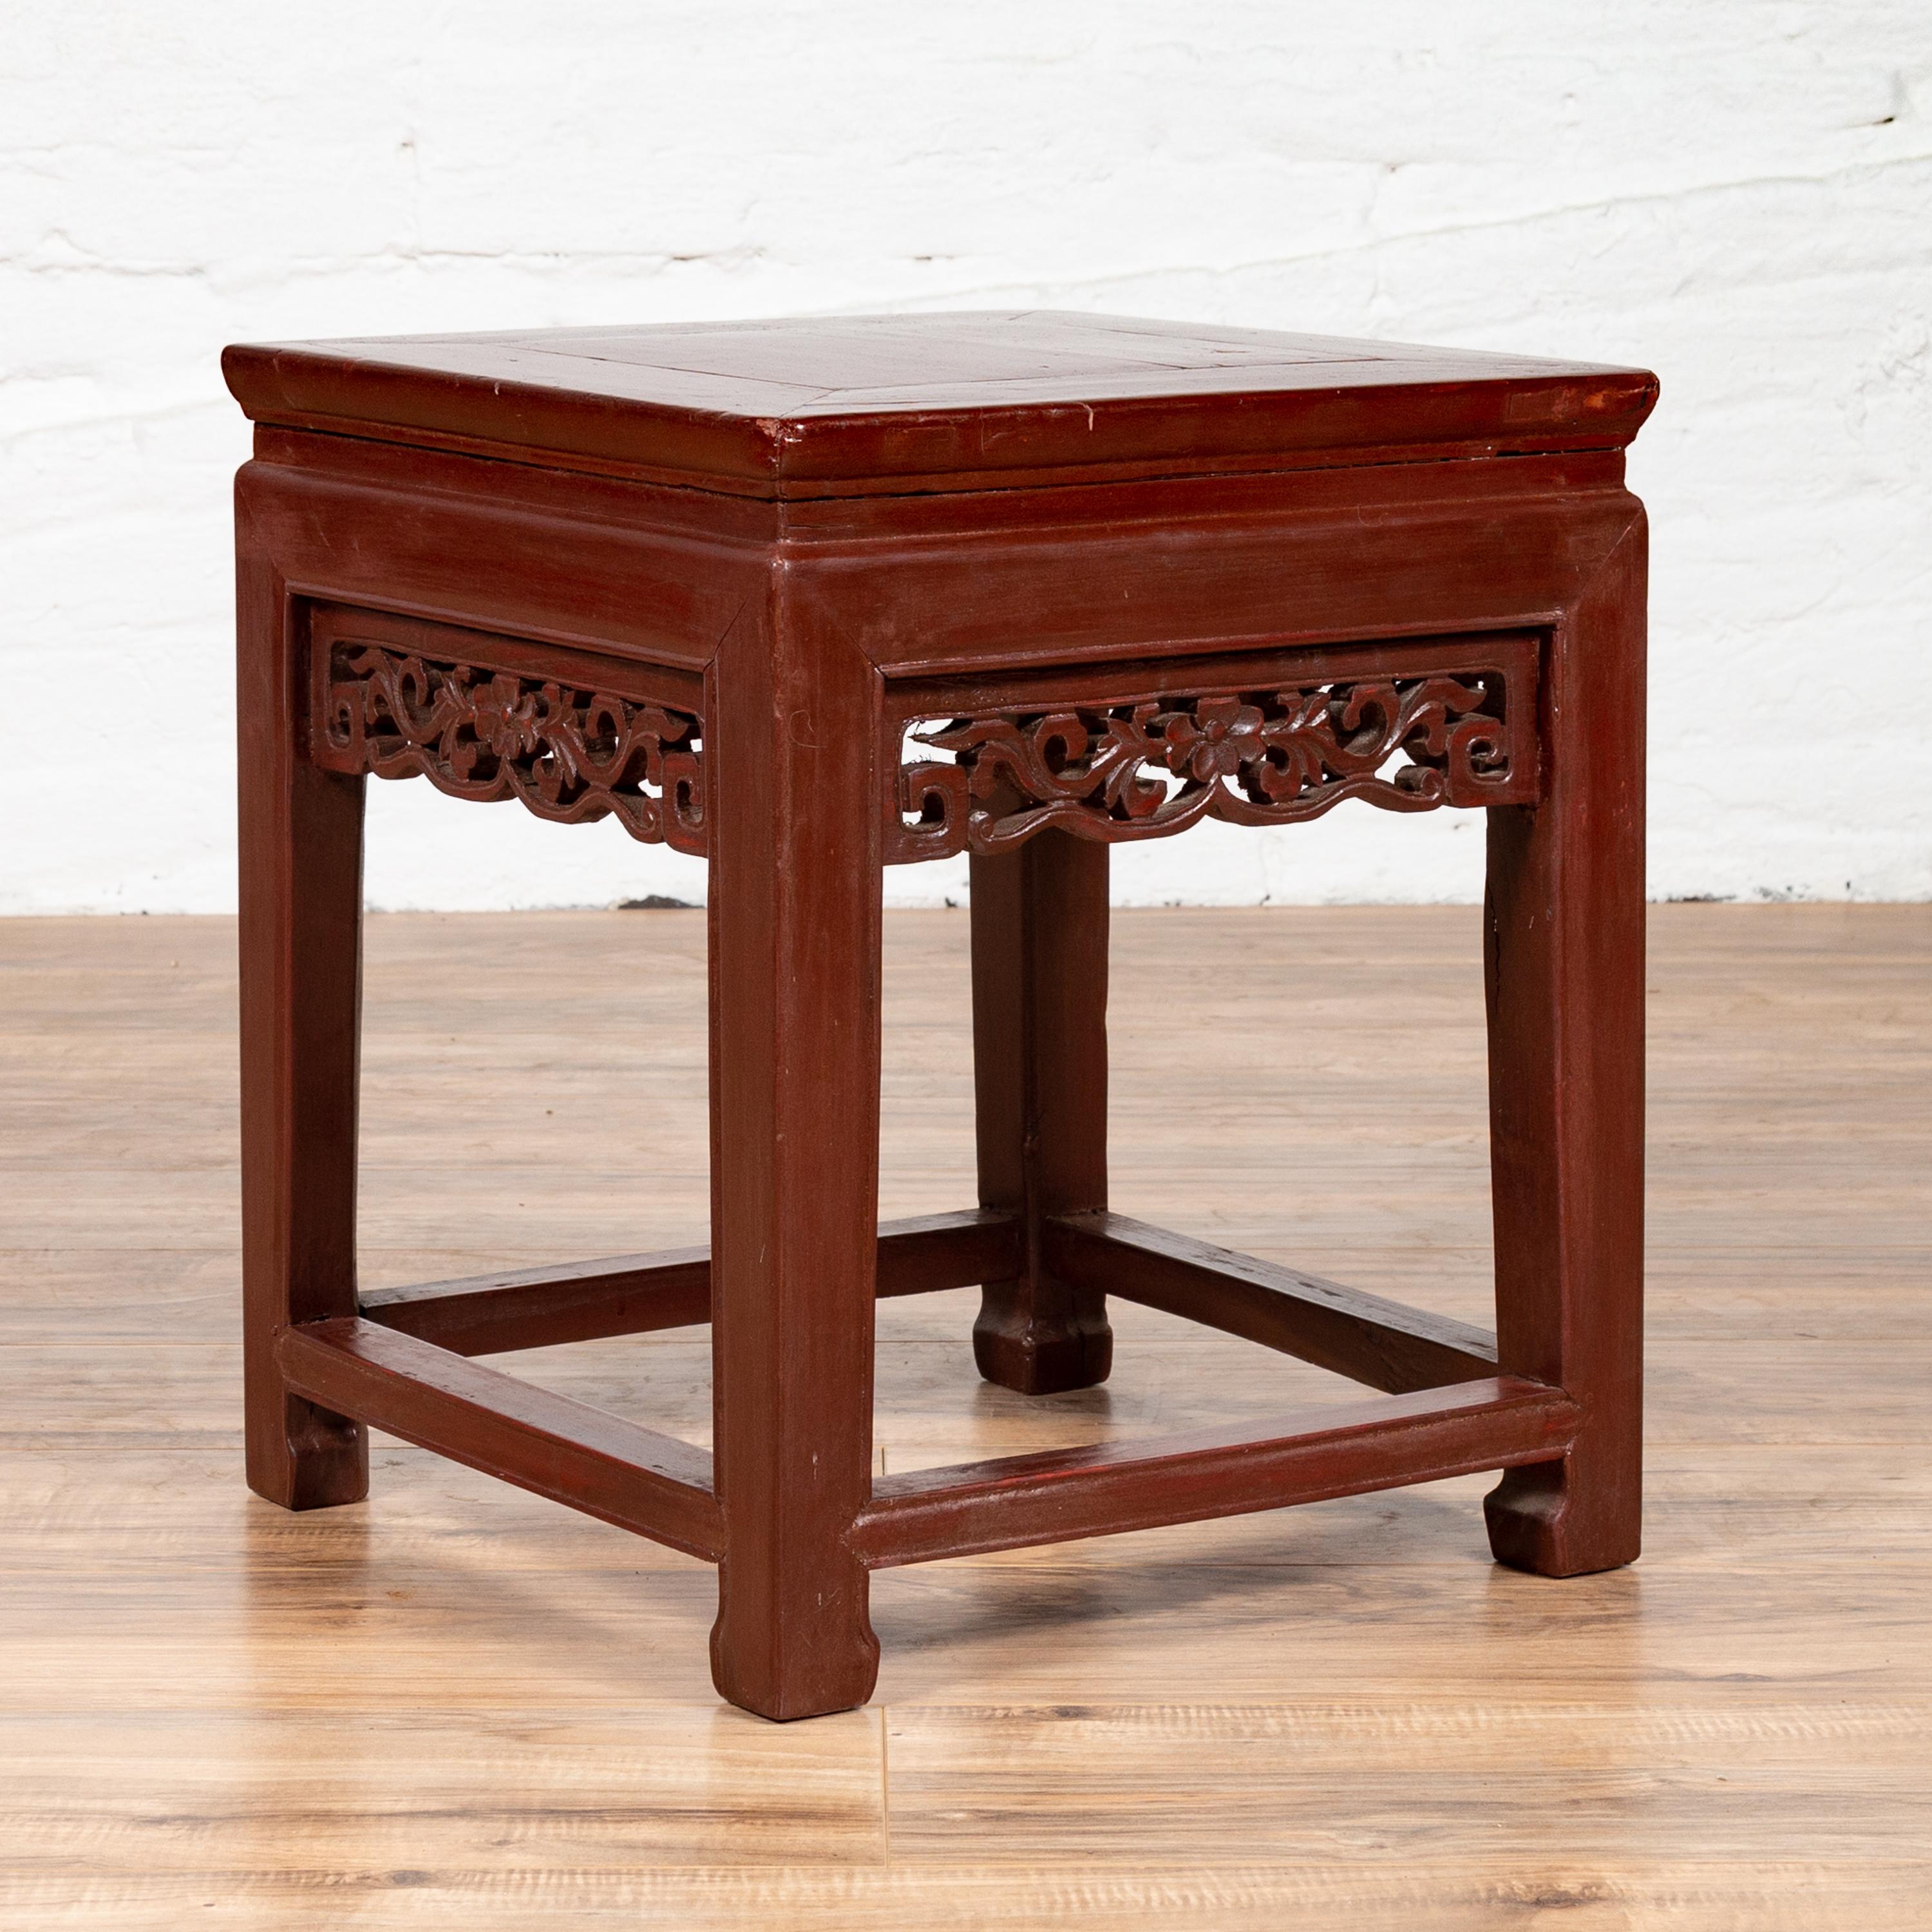 A Chinese vintage waisted side table from the mid 20th century, with dark red wooden patina and carved apron. This Chinese side table presents a perfect contrast between the gentle linearity of its silhouette, and the delicate curves of its carved